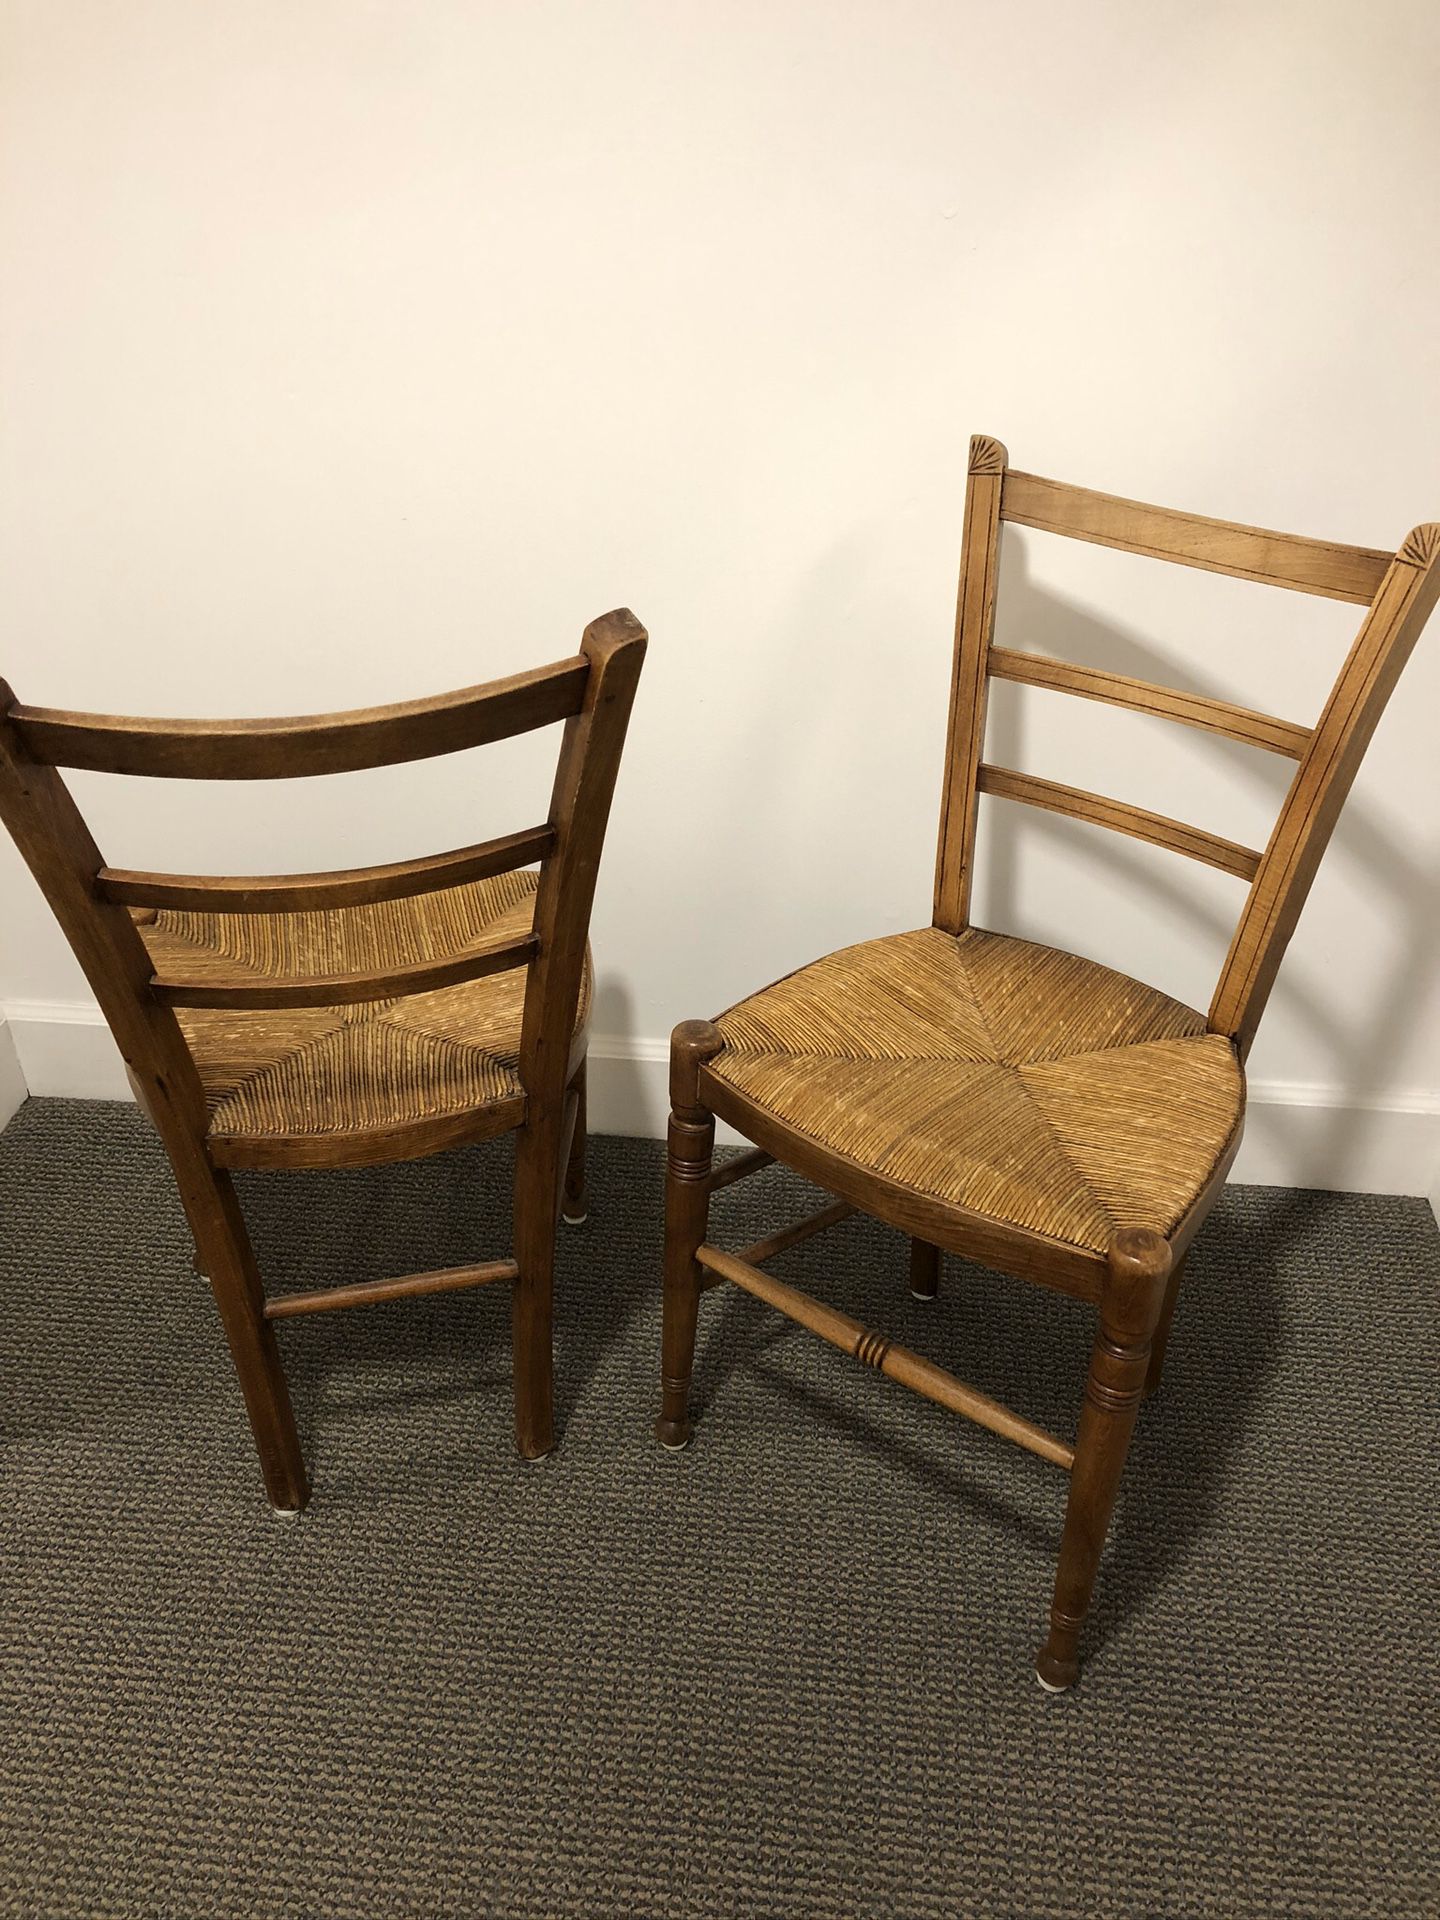 Two chairs $45